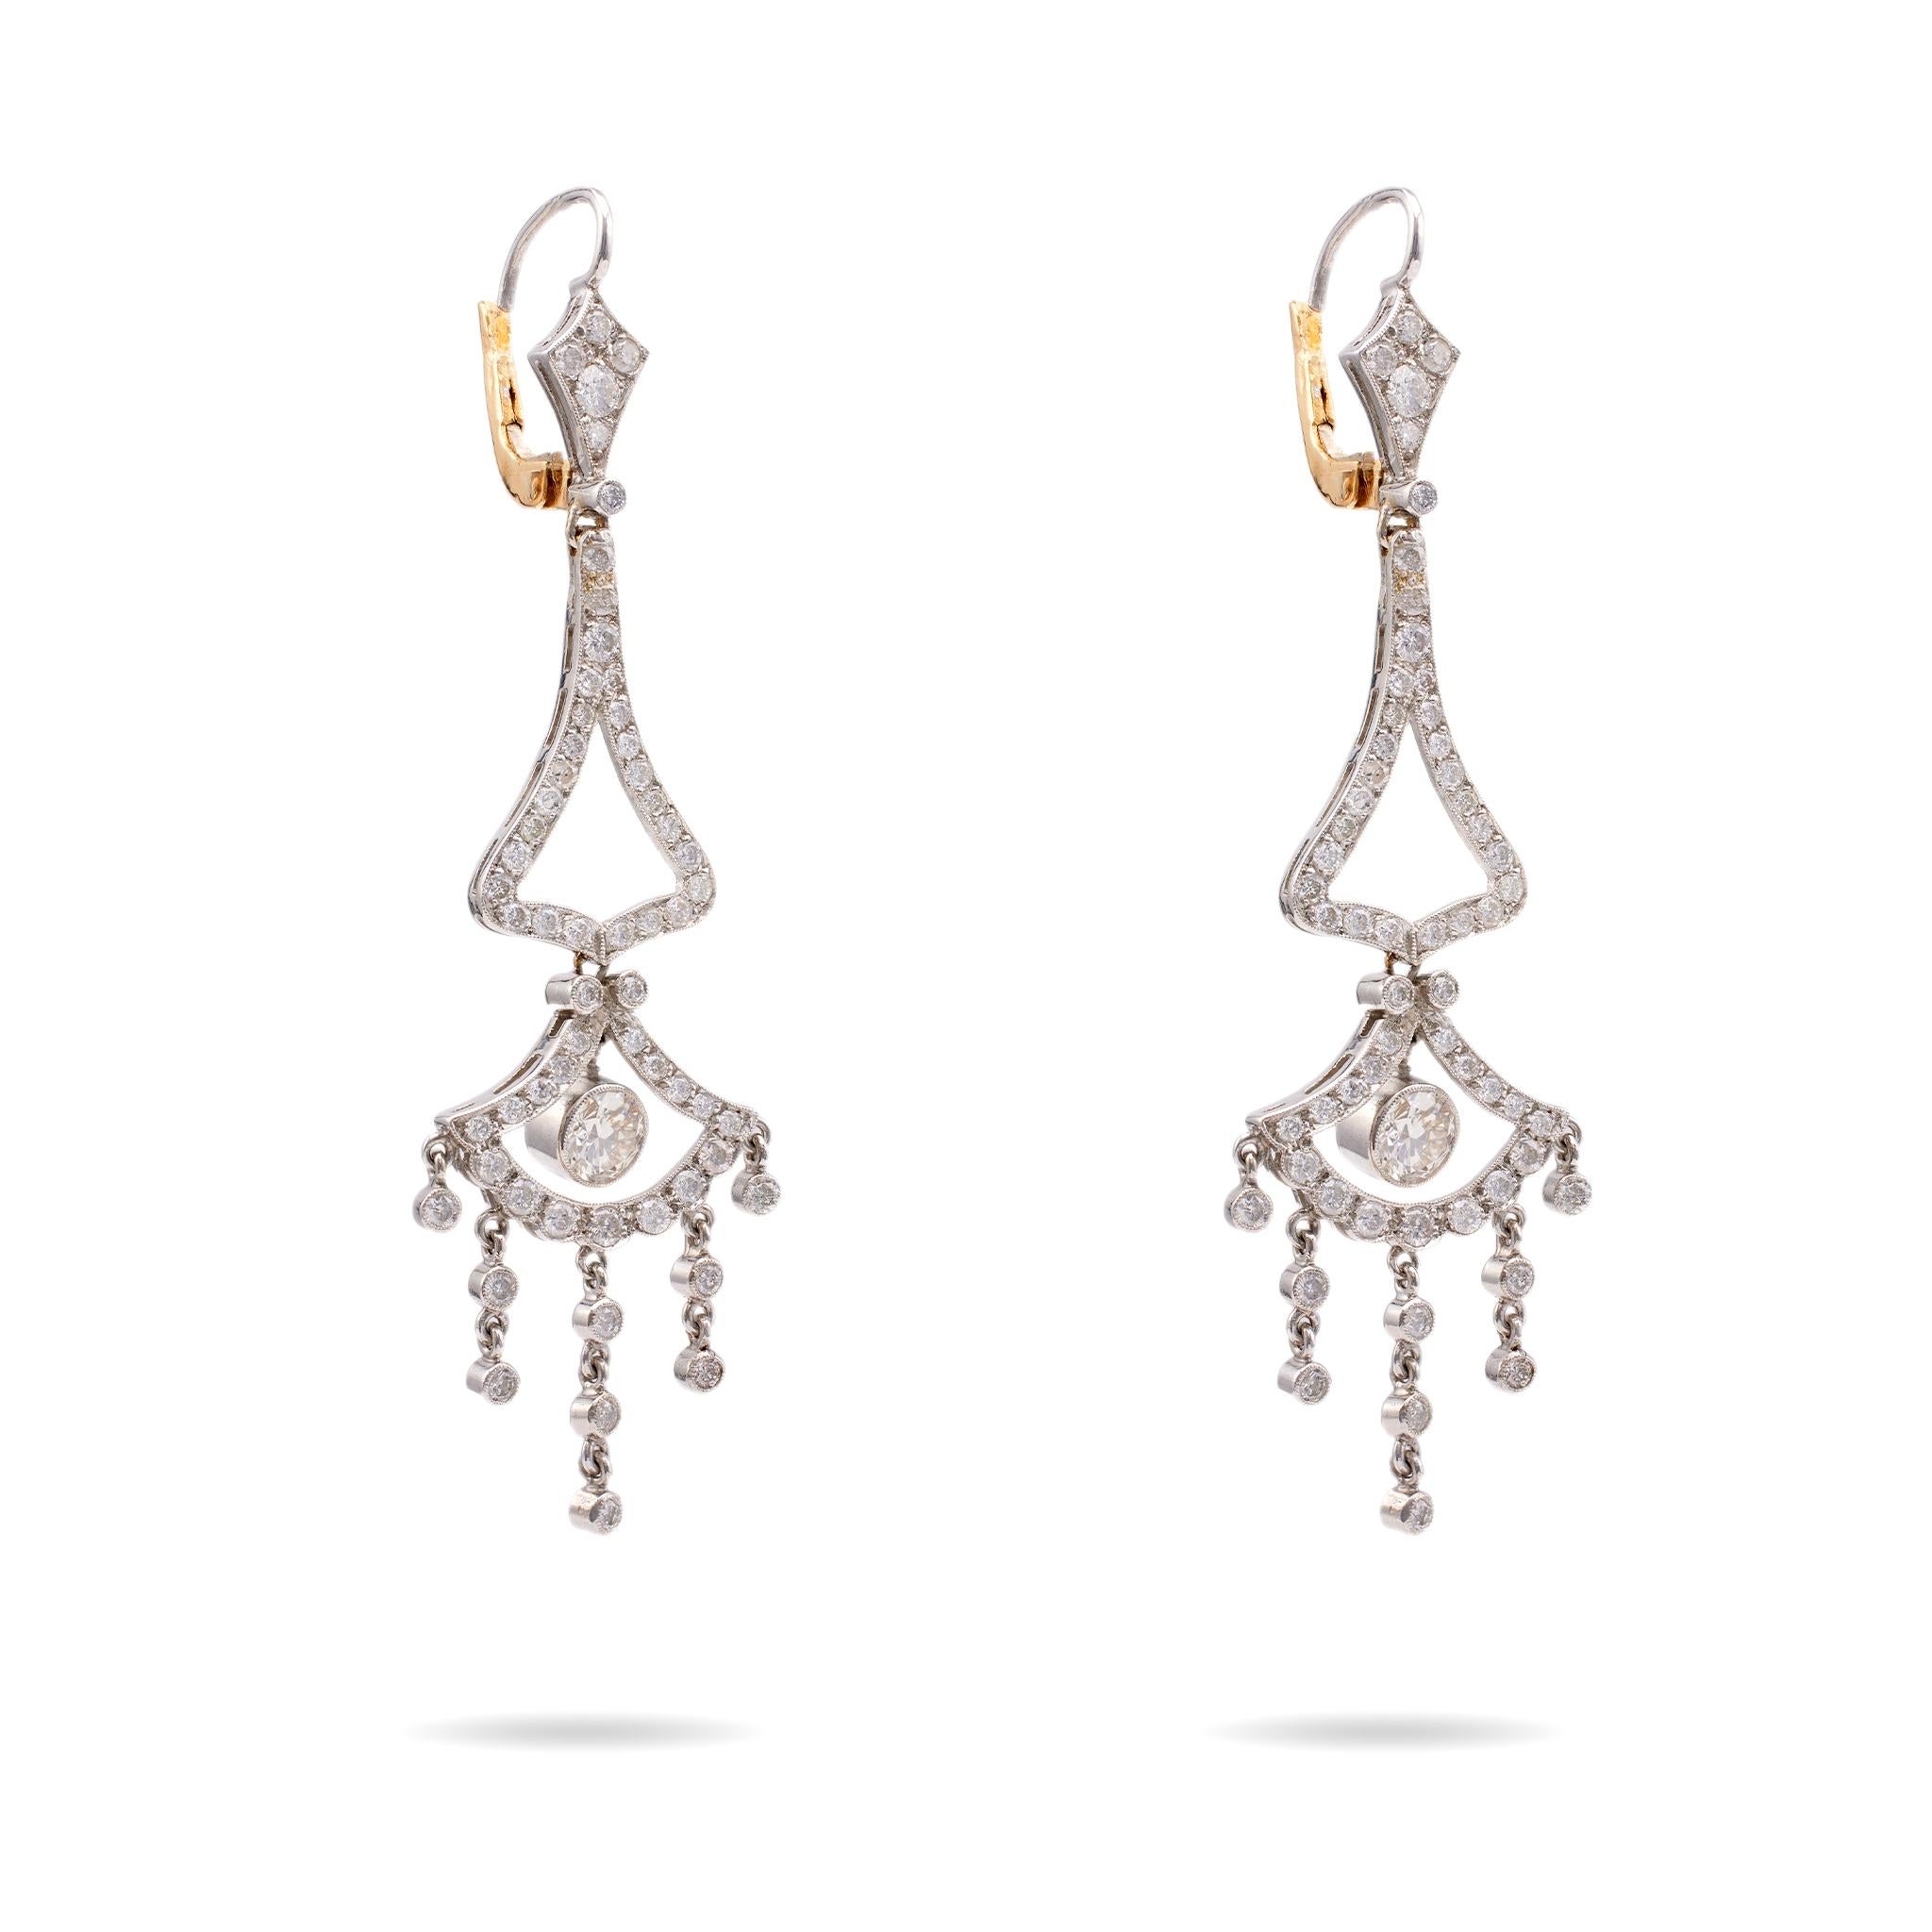 Pair of Art Deco Inspired Diamond Platinum Chandelier Earrings In Excellent Condition For Sale In Beverly Hills, CA